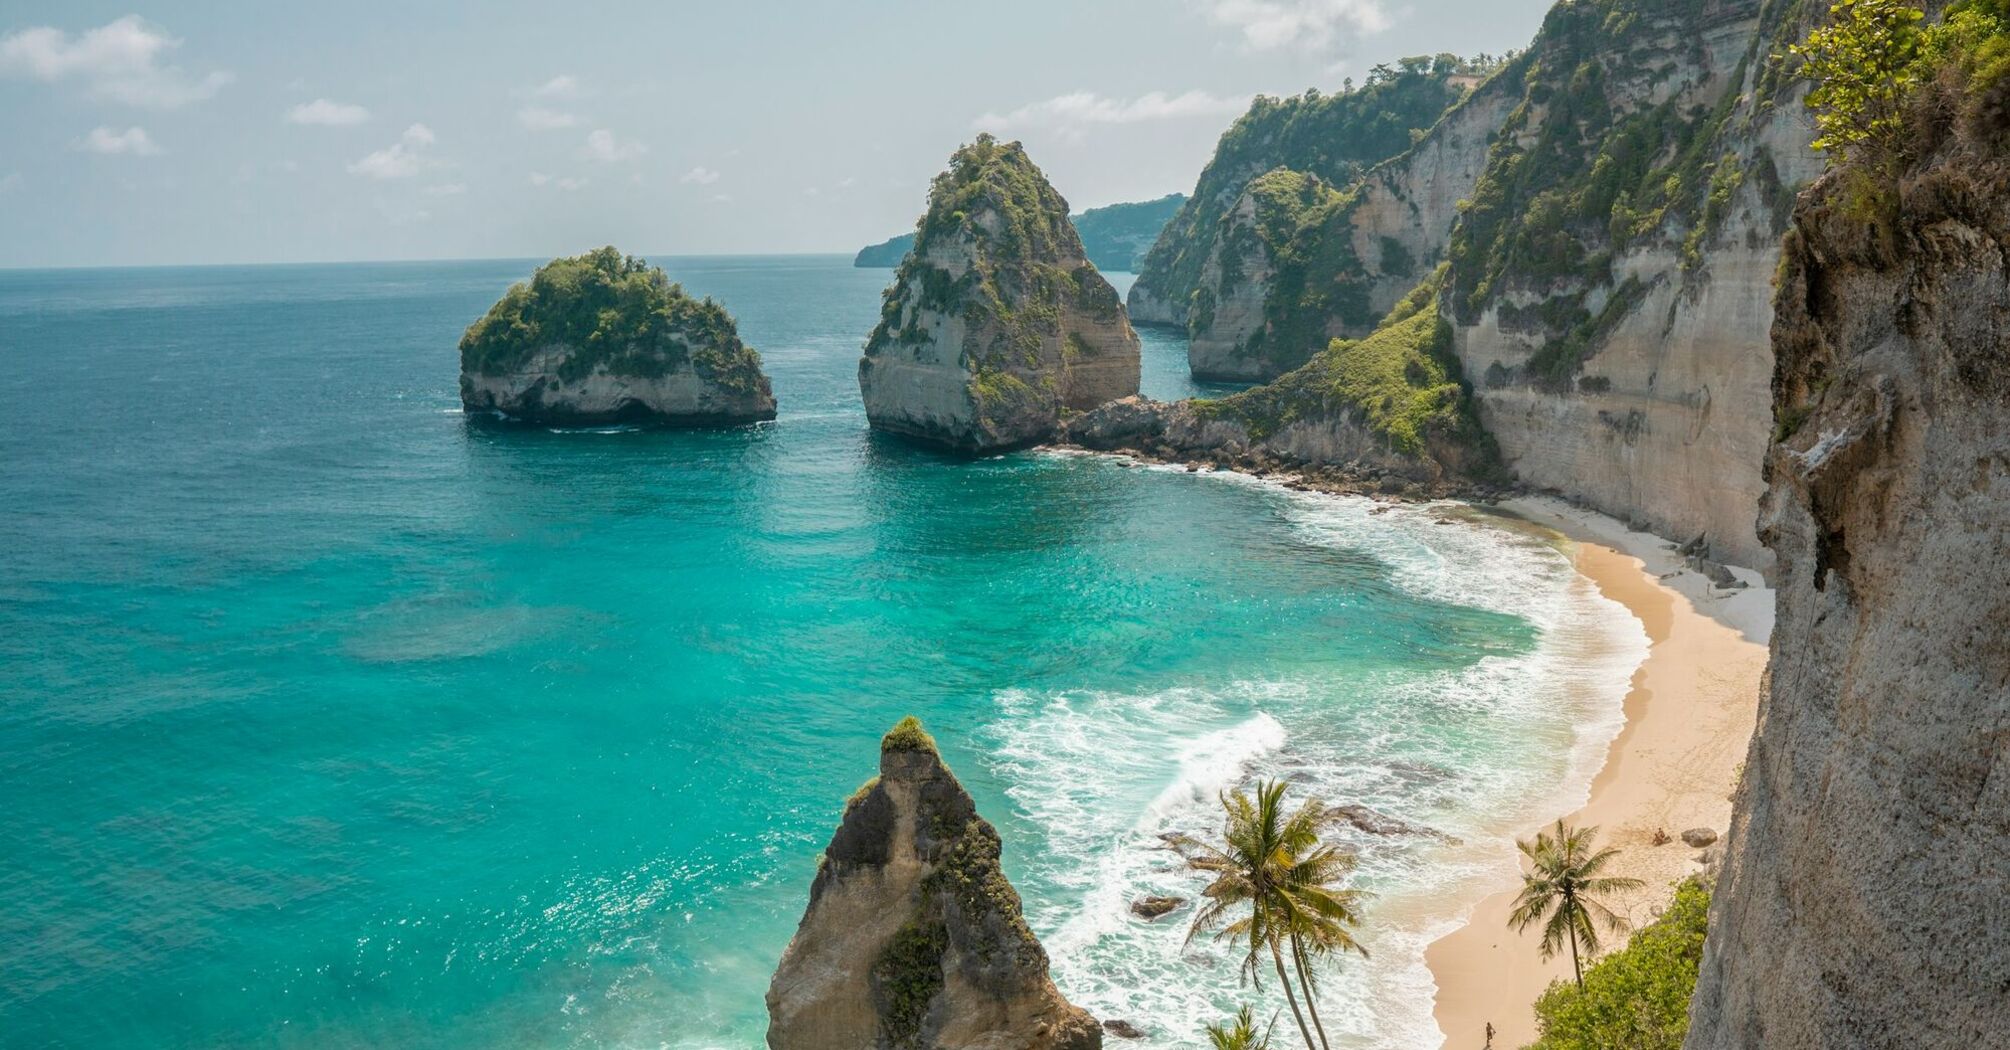 Scenic beach view in Bali with turquoise water and rocky cliffs